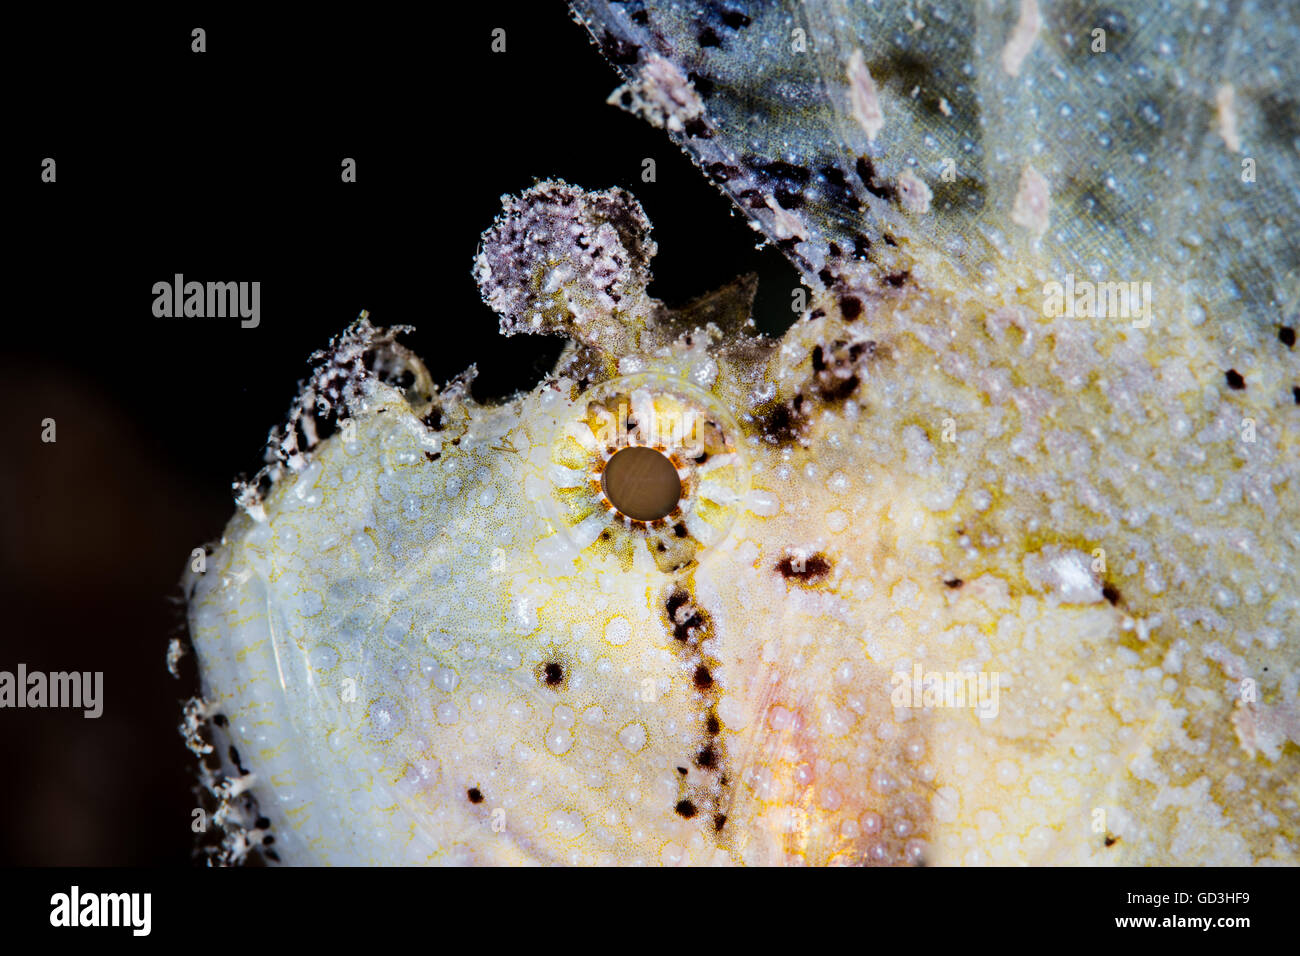 Detail of a predatory Leaf scorpionfish (Taenianotus triacanthus) sitting on a coral reef in Indonesia. Stock Photo